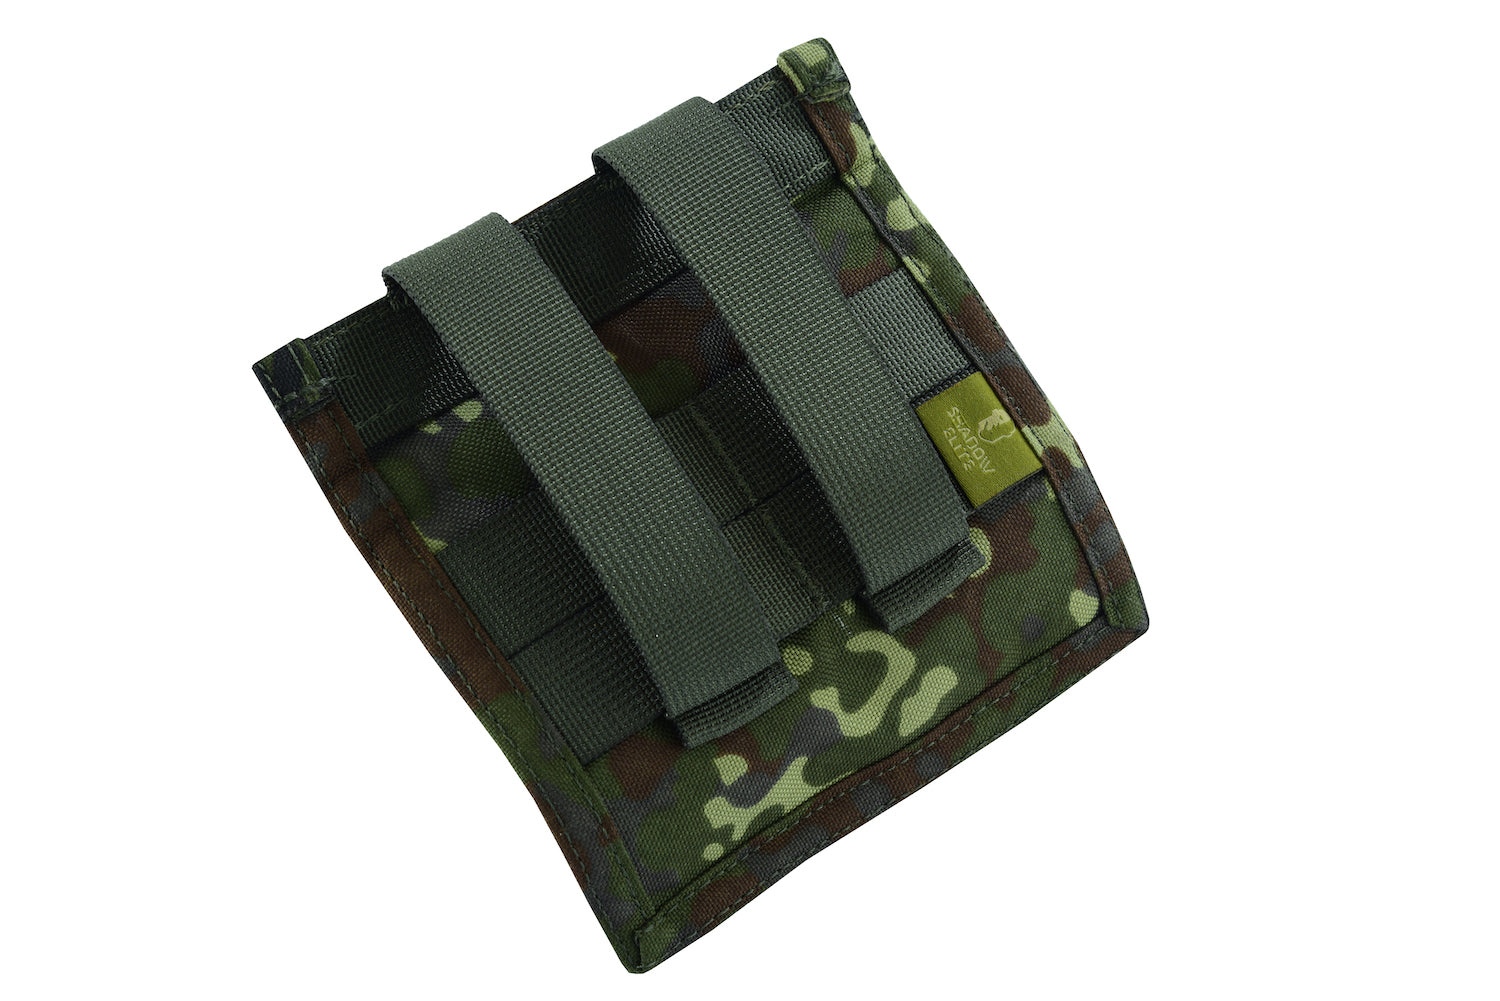 Flectarn Double Pistol Mag Pouch